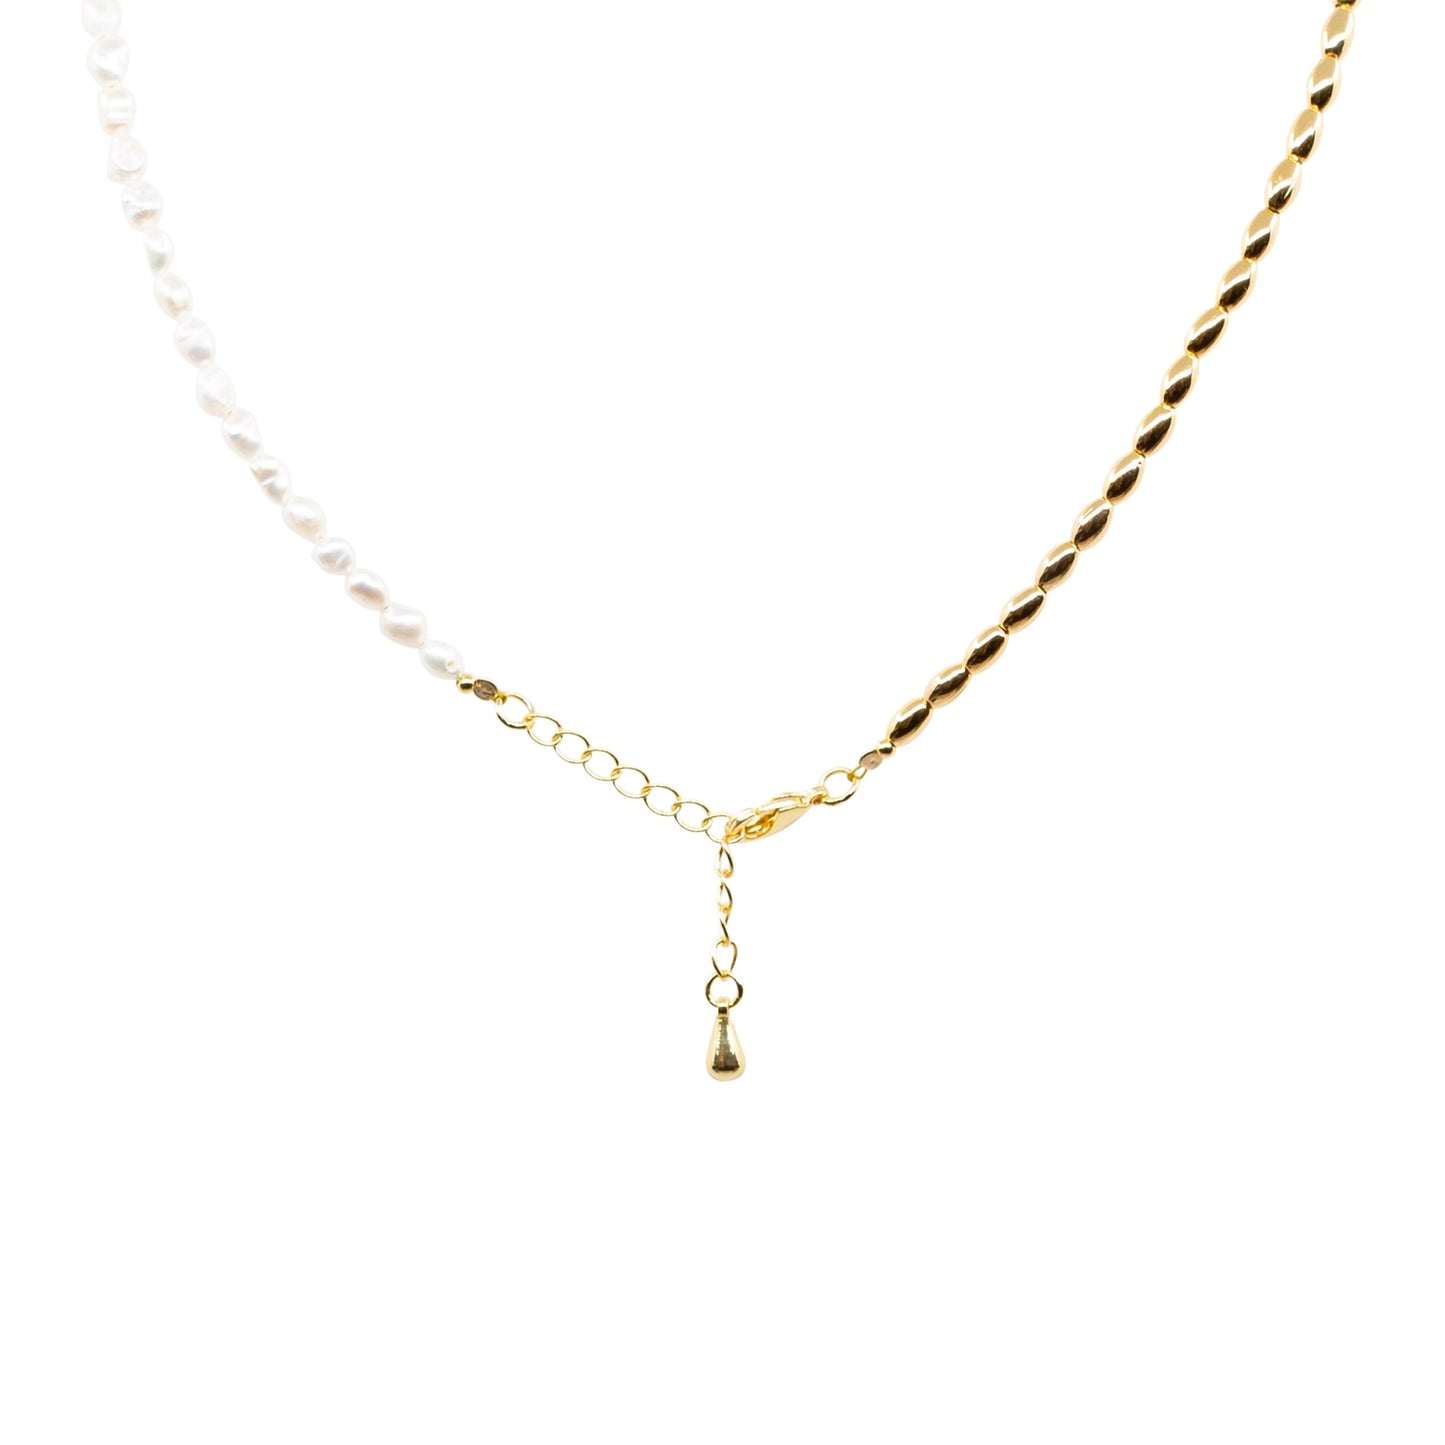 Gloria - Gold-Tone and Freshwater Pearl Necklace